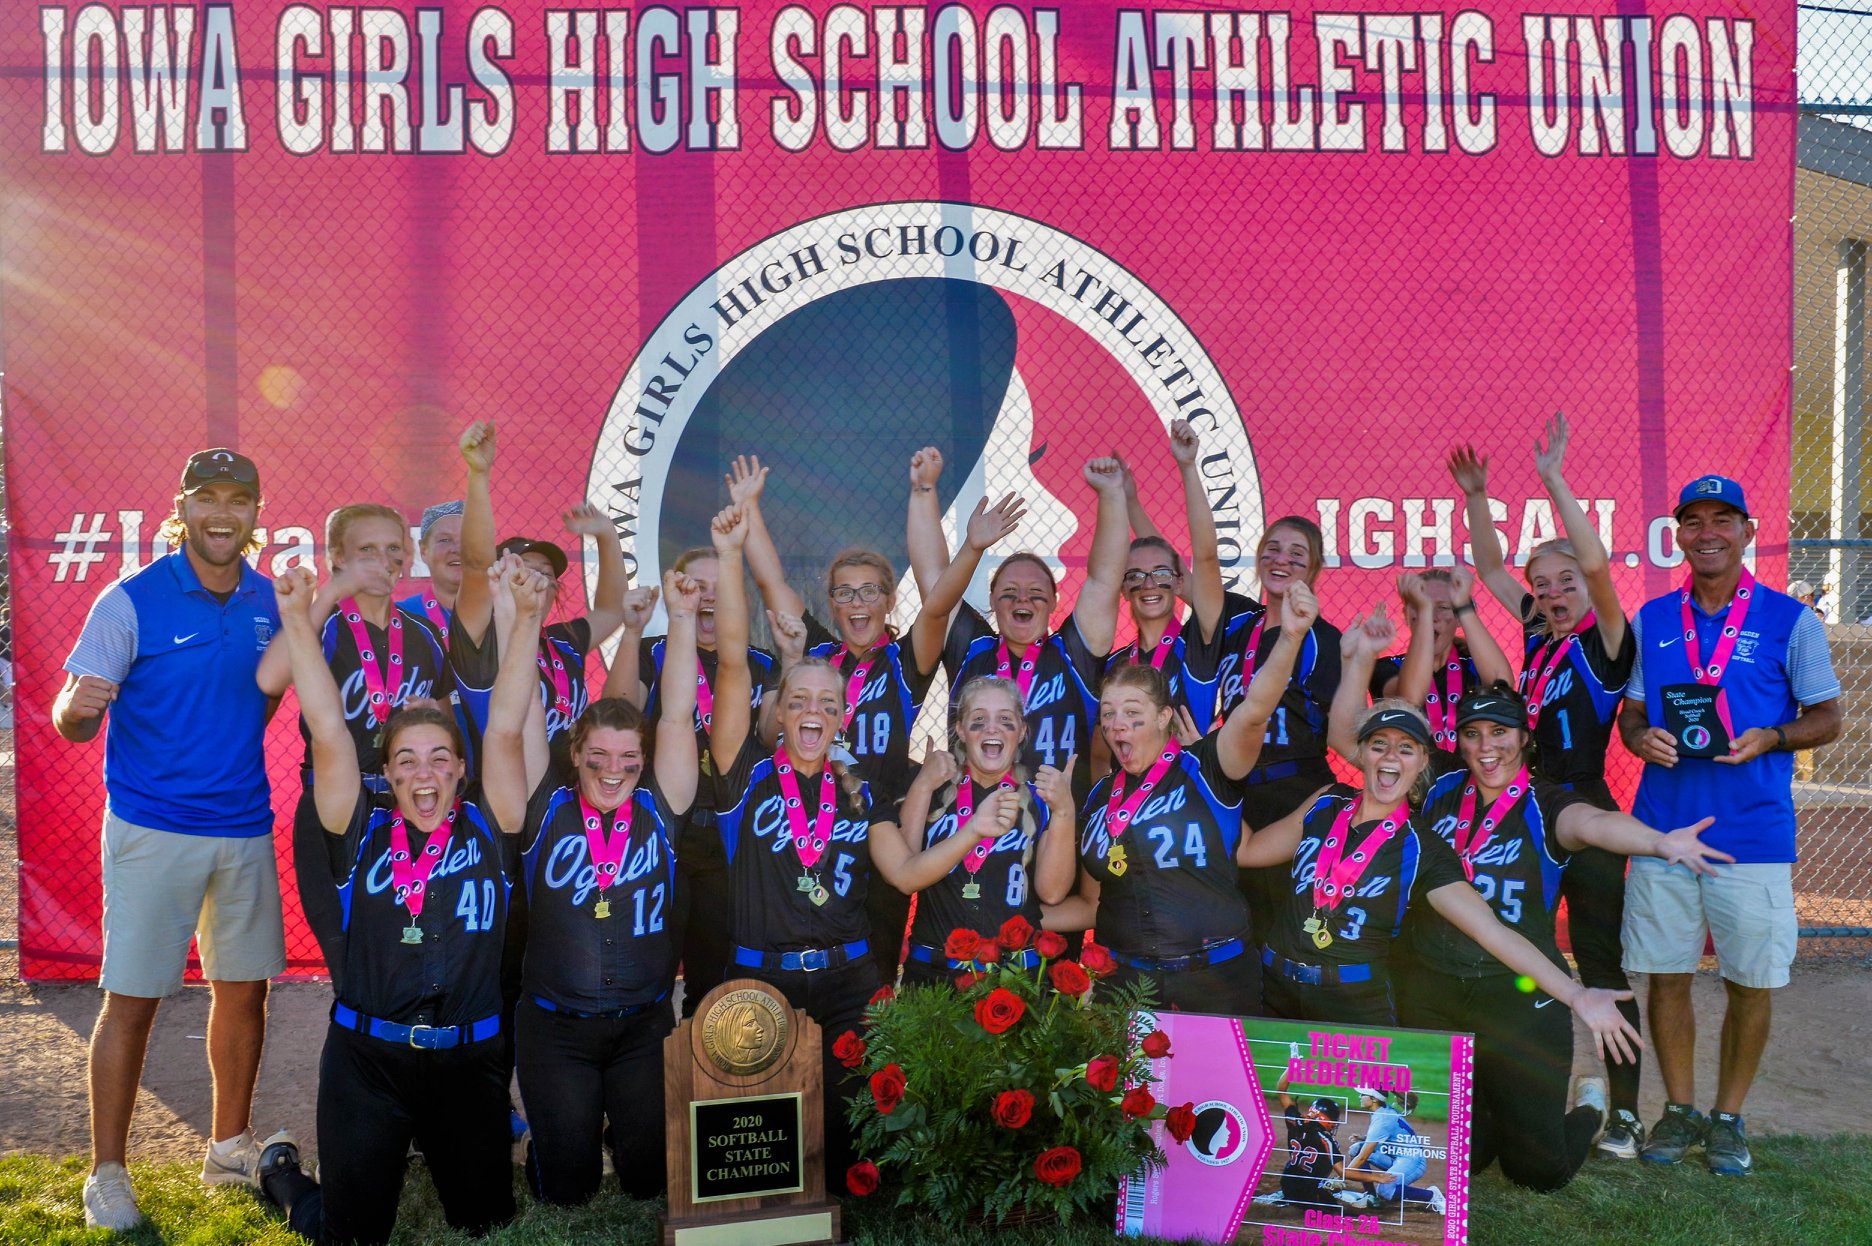 Softball team holding medals and smiling in from of Iowa Girls High School Athletic Union sign